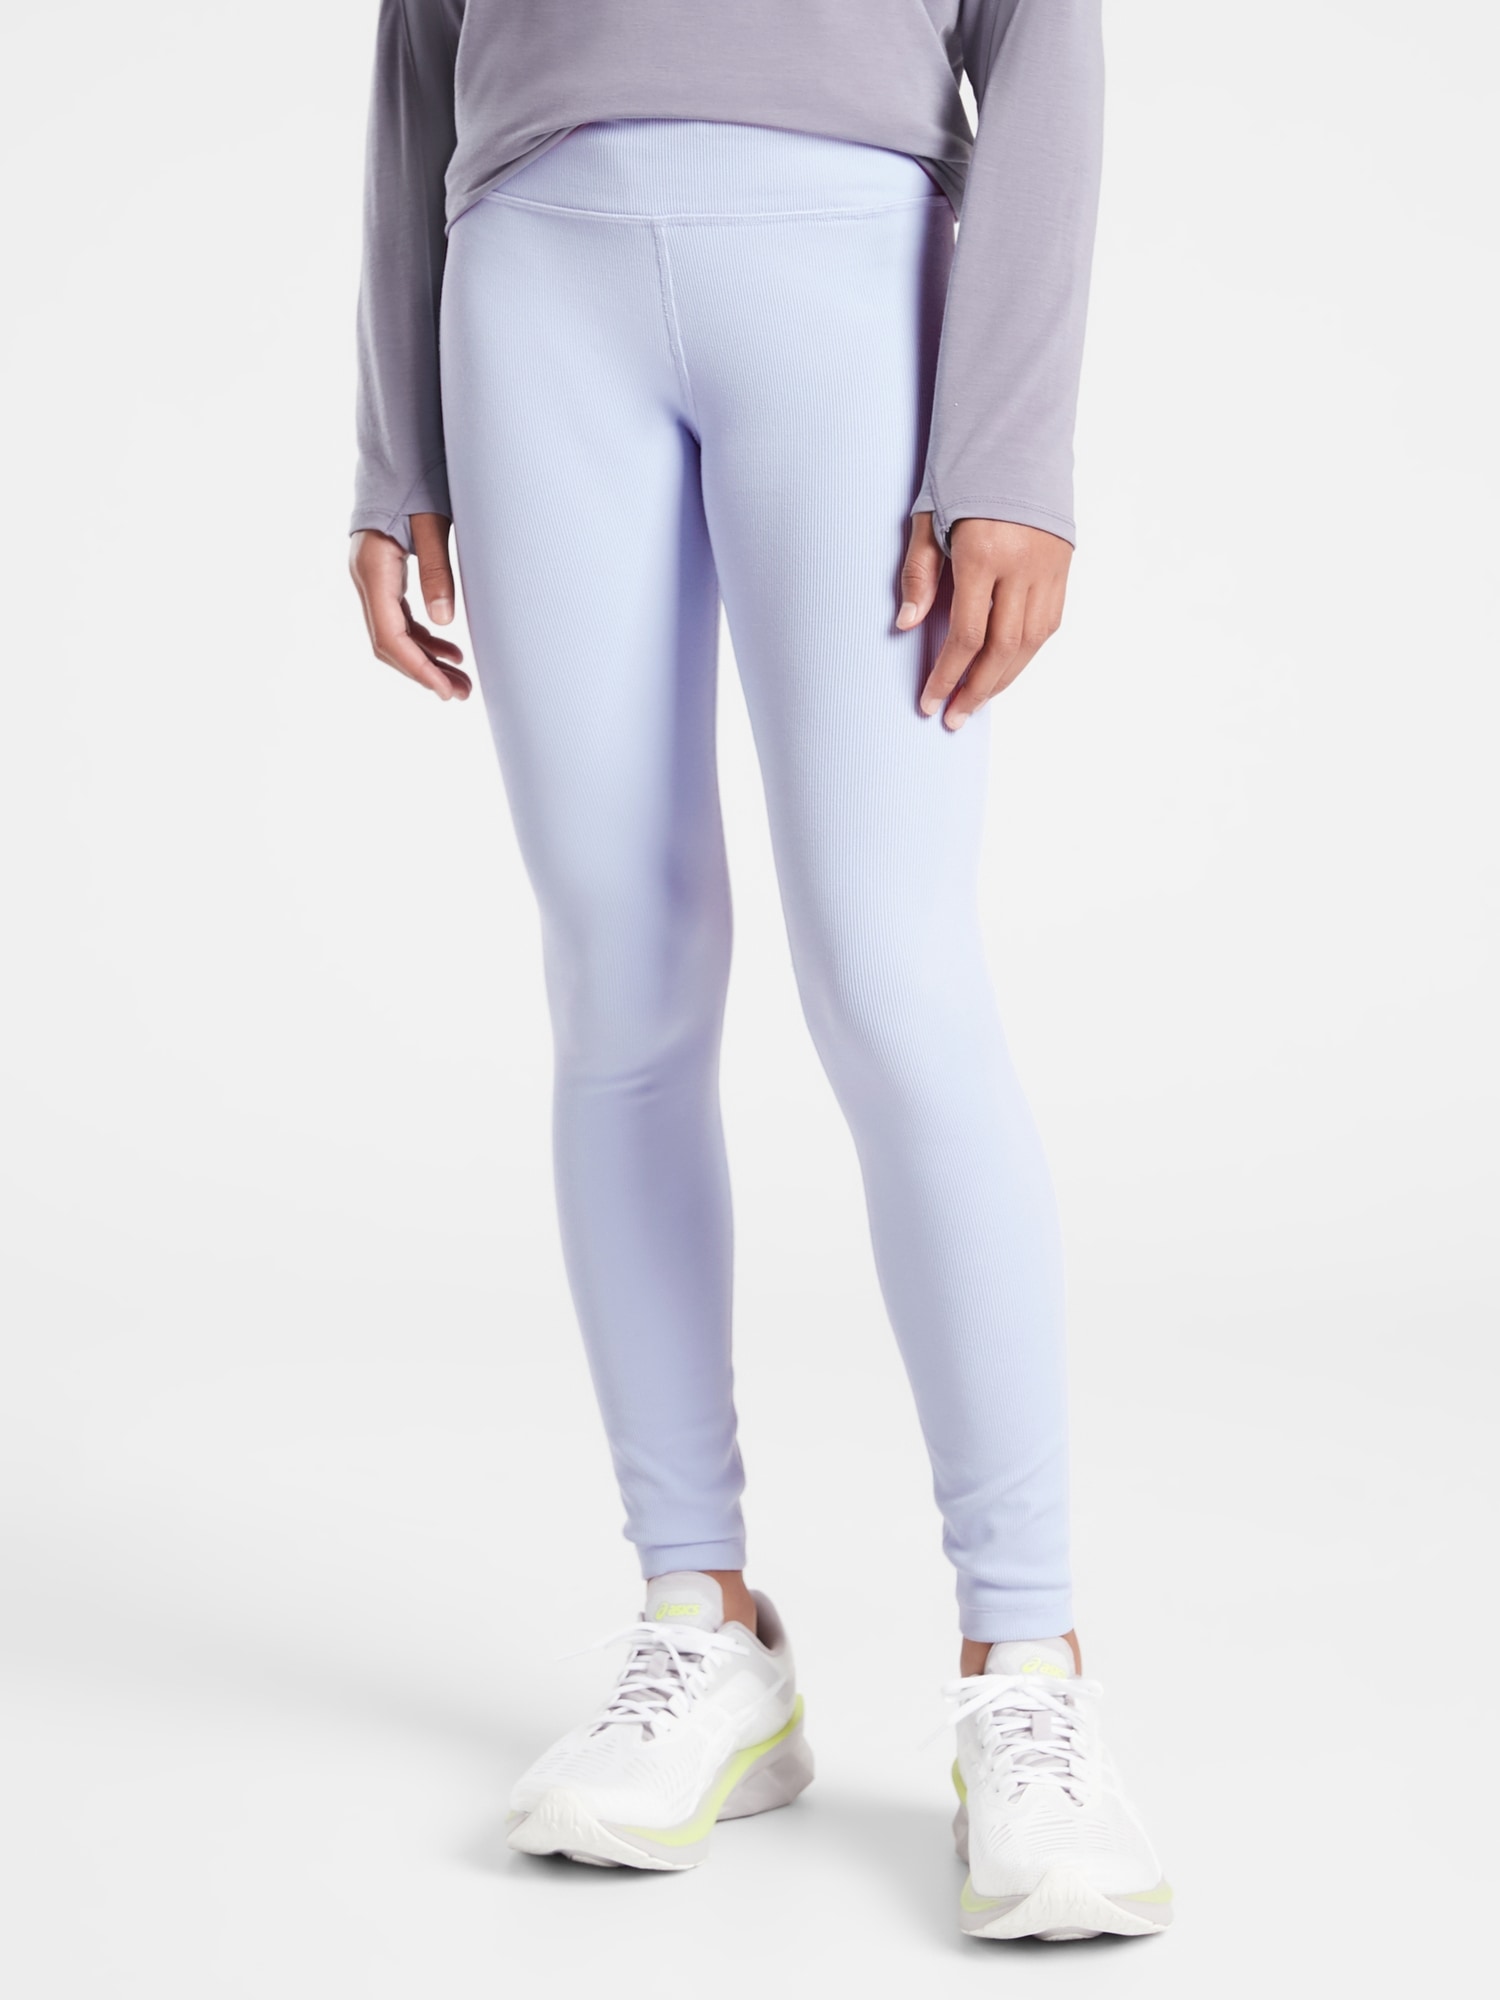 Athleta Girl High Rise Ribbed Chit Chat Tight